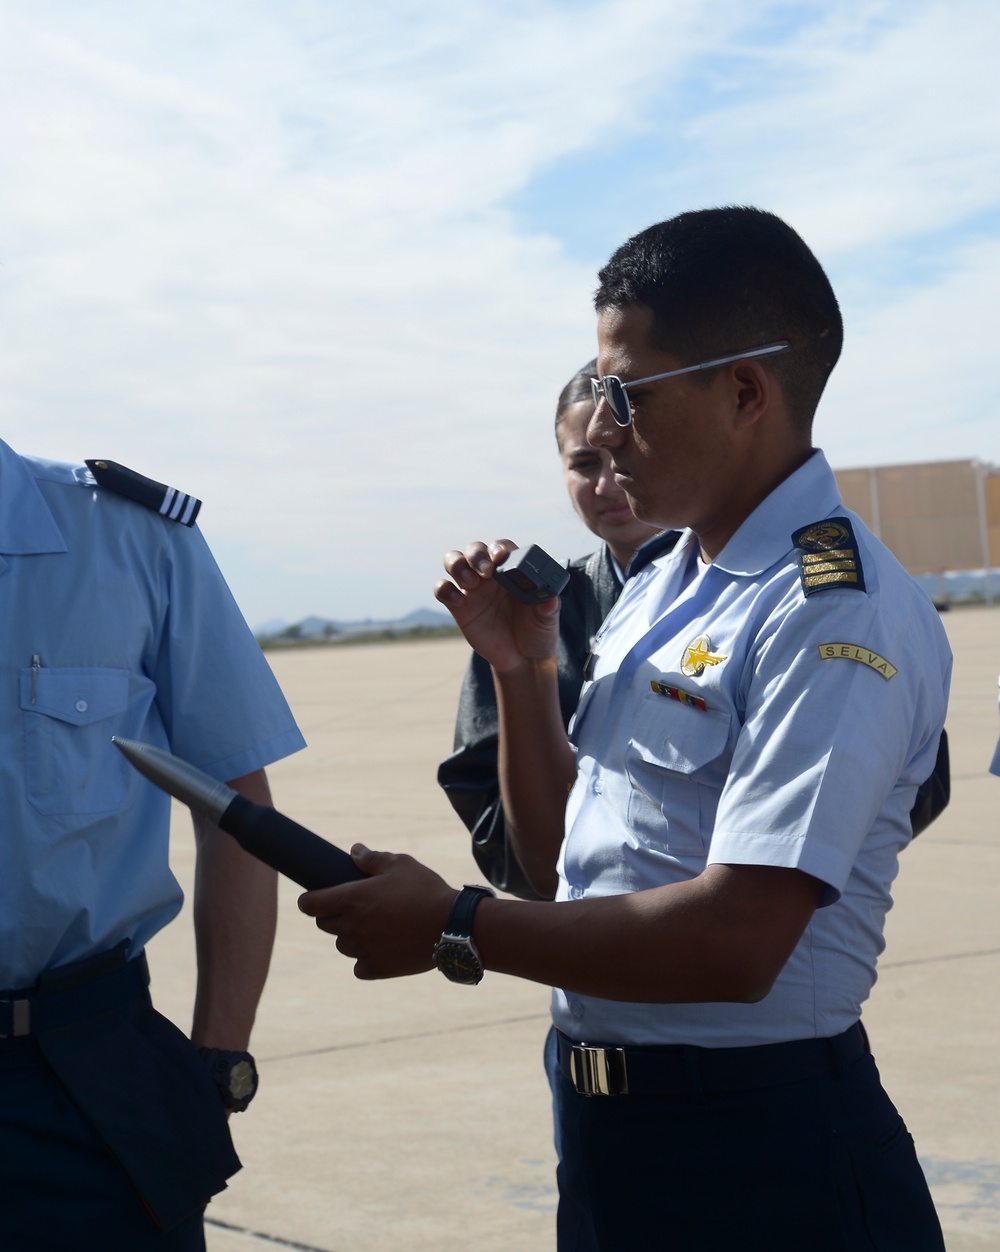 Latin American Air Force cadets tour US, build partnerships throughout the hemisphere